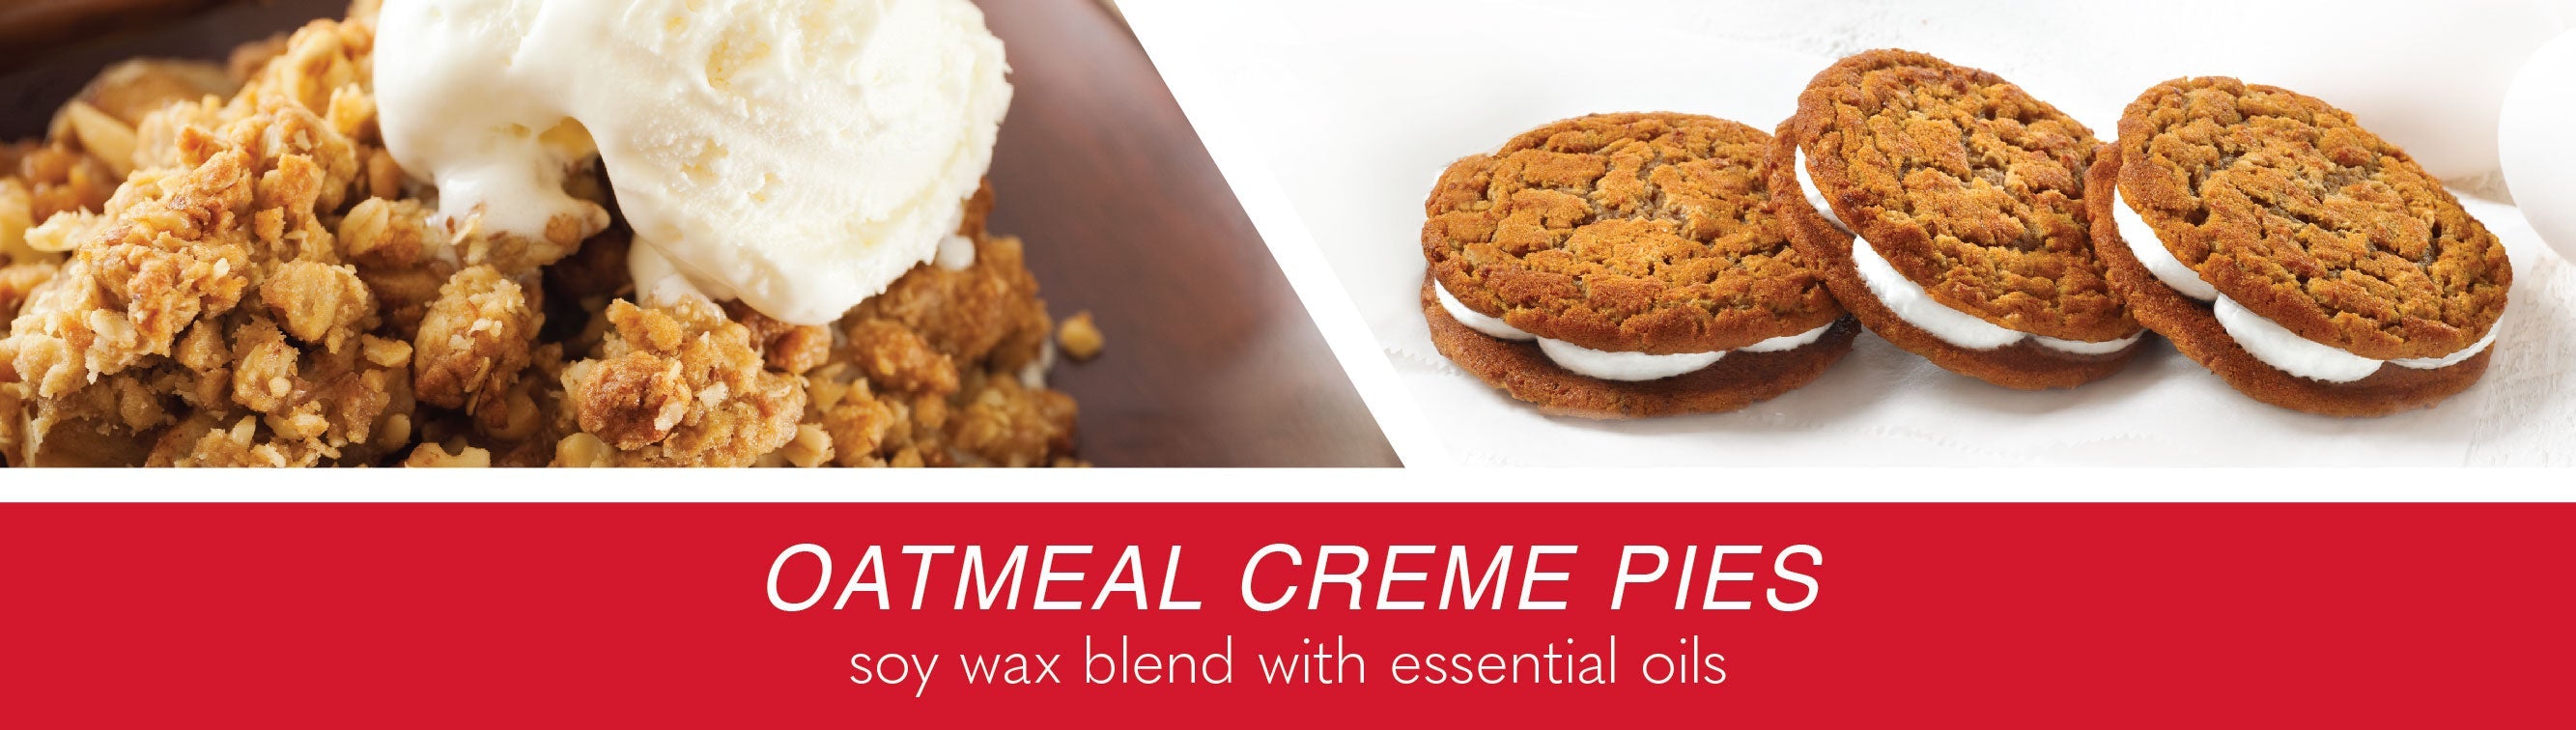 Oatmeal Creme Pies Fragrance-Goose Creek Candle